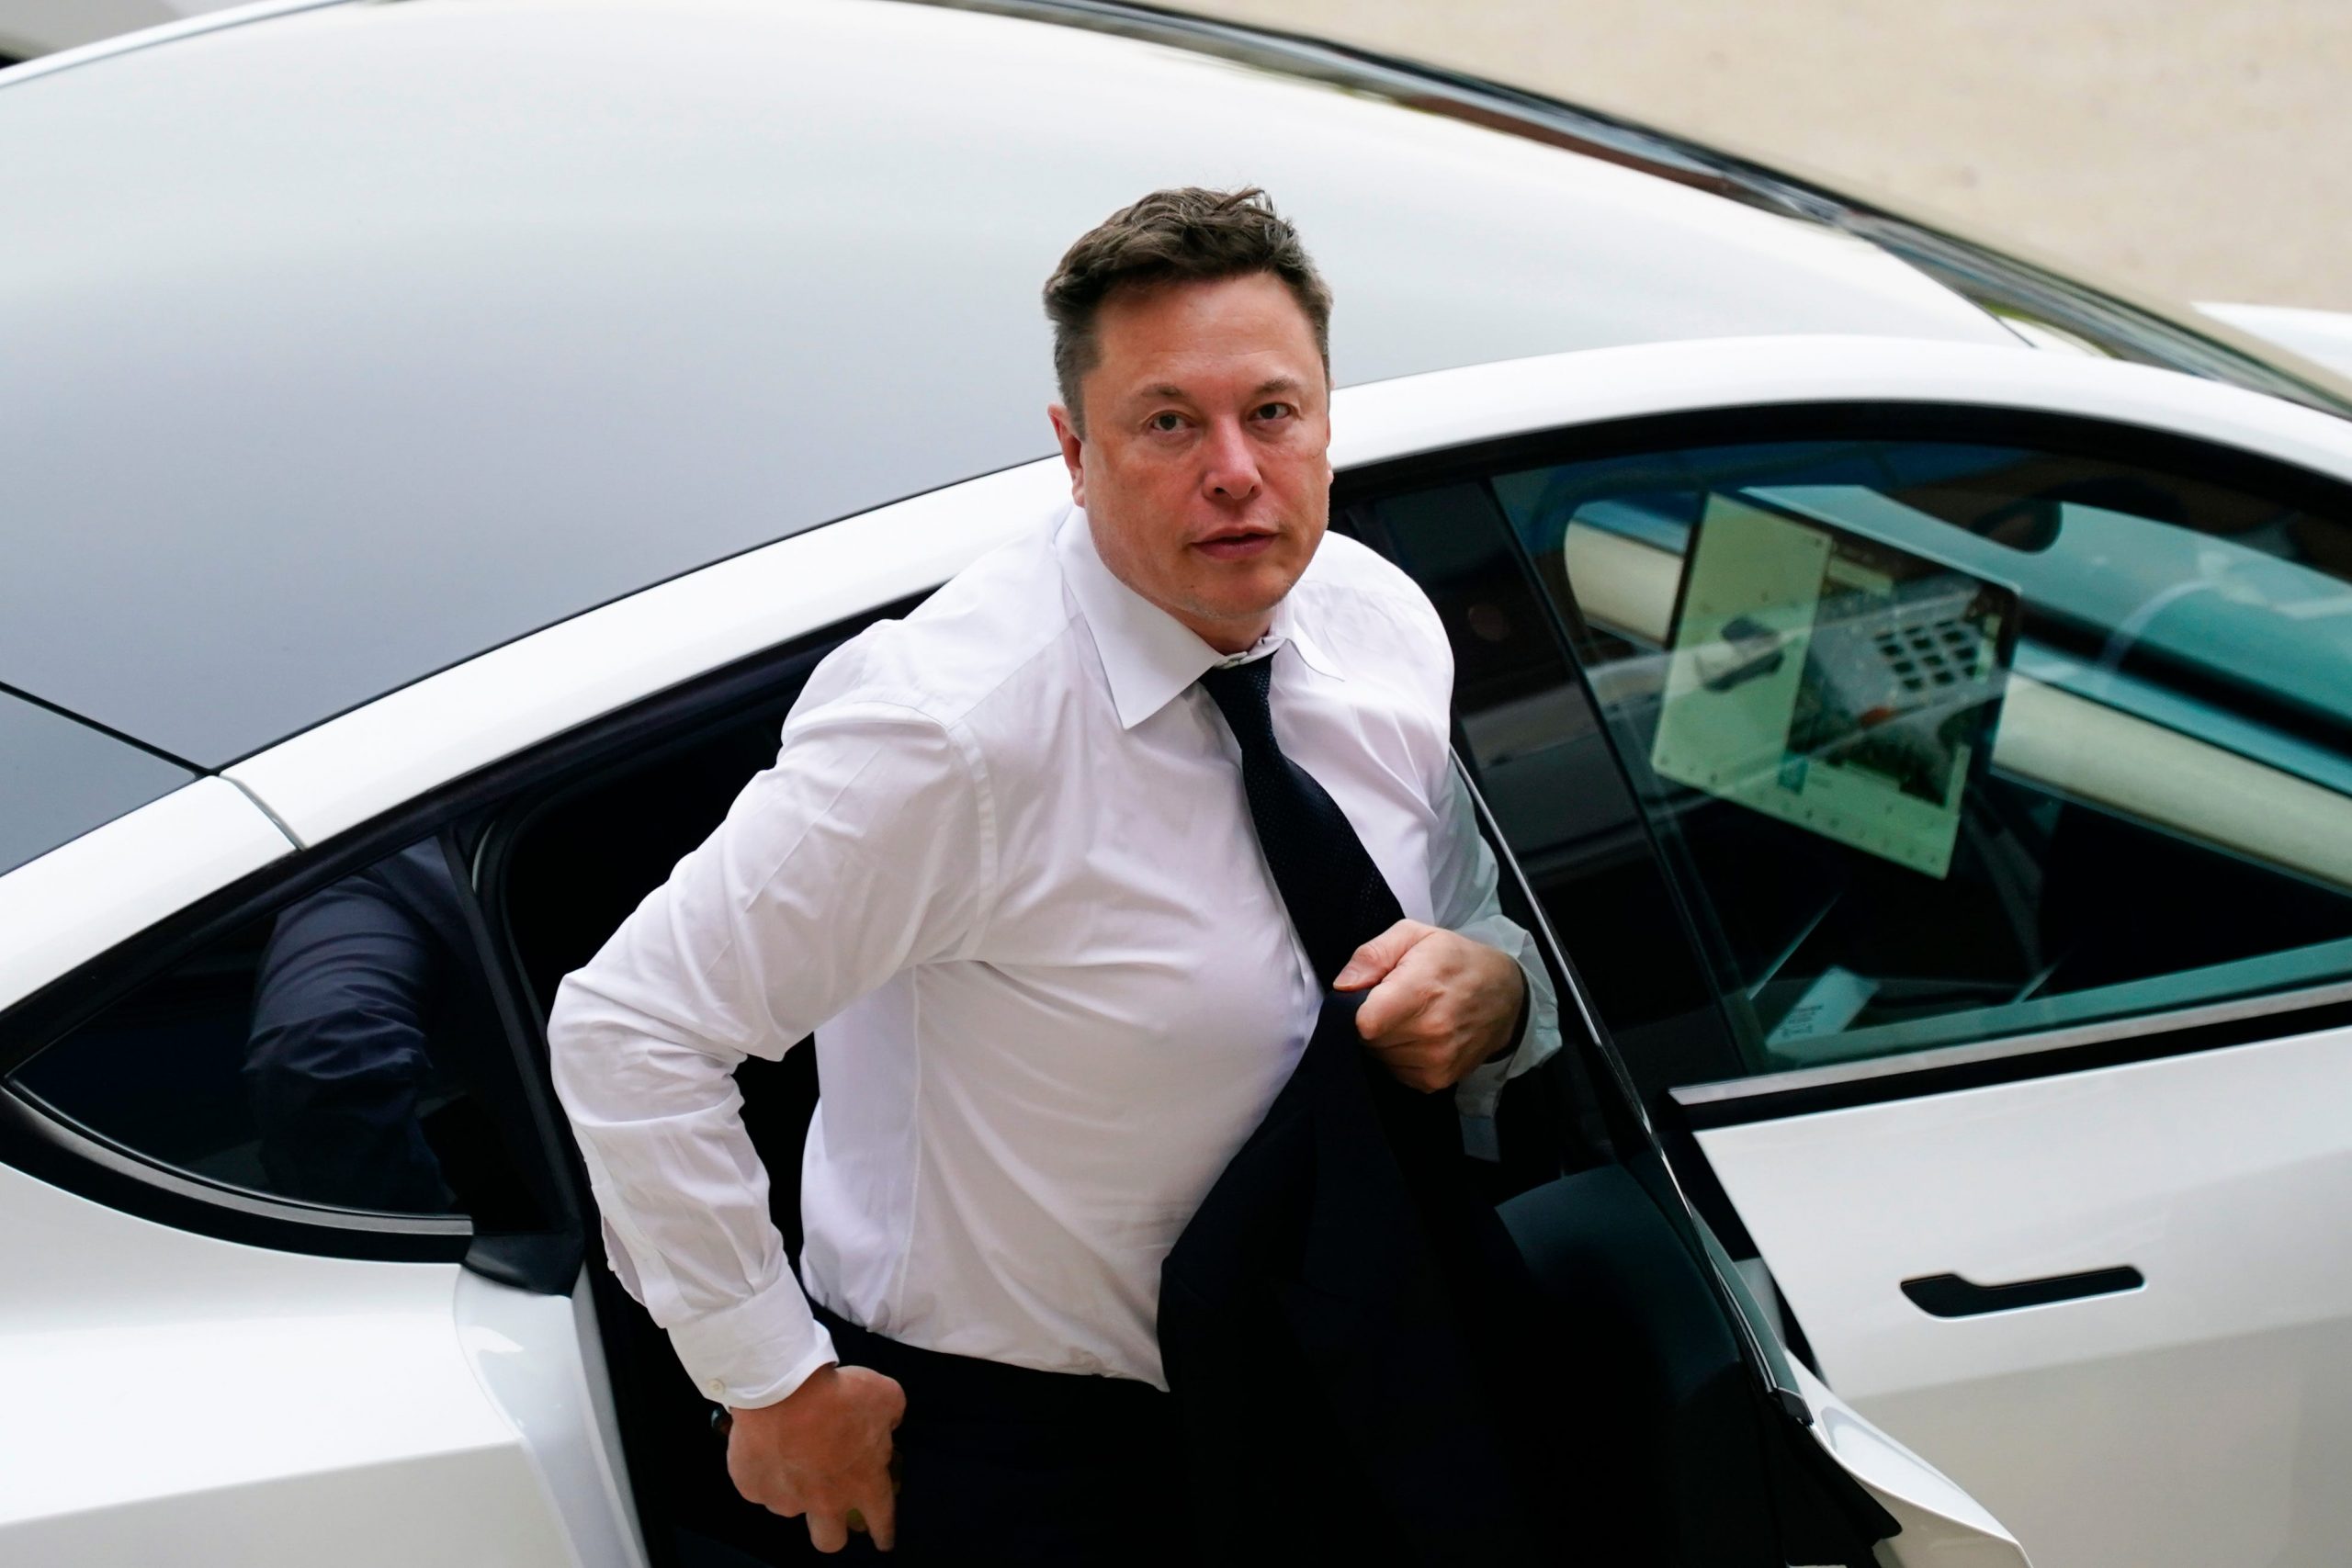 Tesla CEO Elon Musk stepping out of a silver Tesla wearing a white shirt and black tie on a sunny day